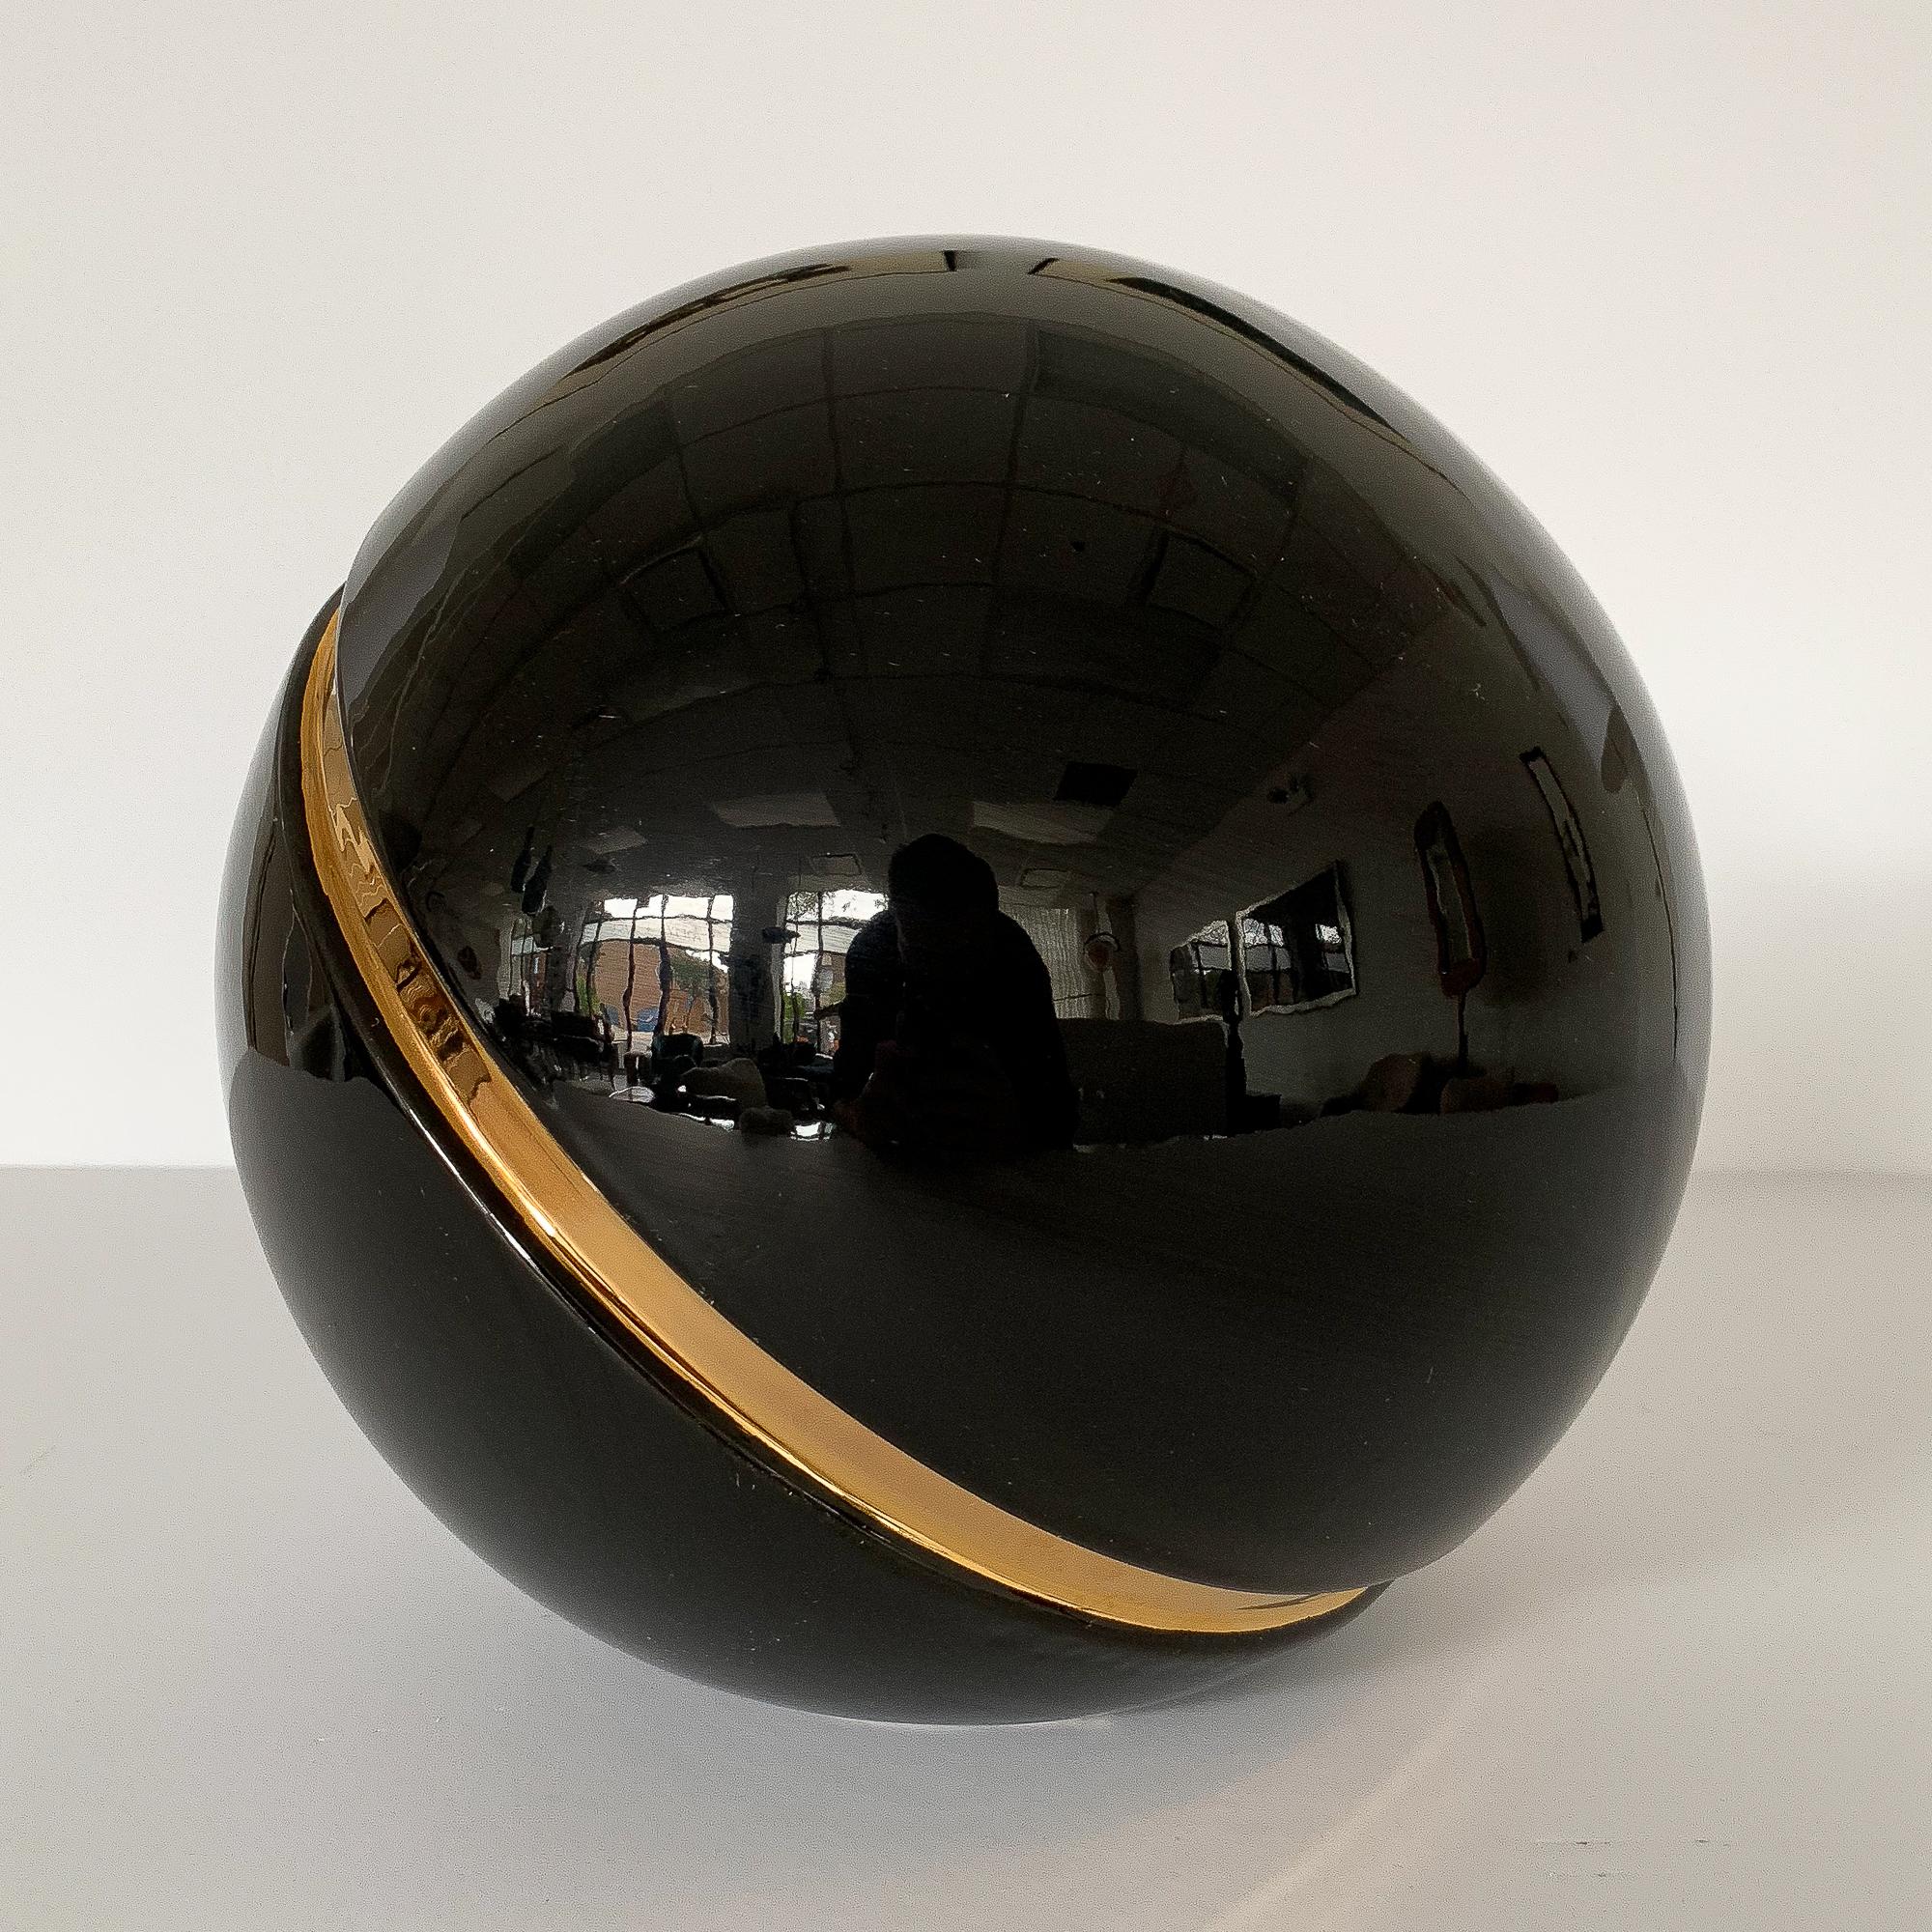 Large Jaru black glazed ceramic sphere with inset groove of metallic gold glaze. The ball measures 11